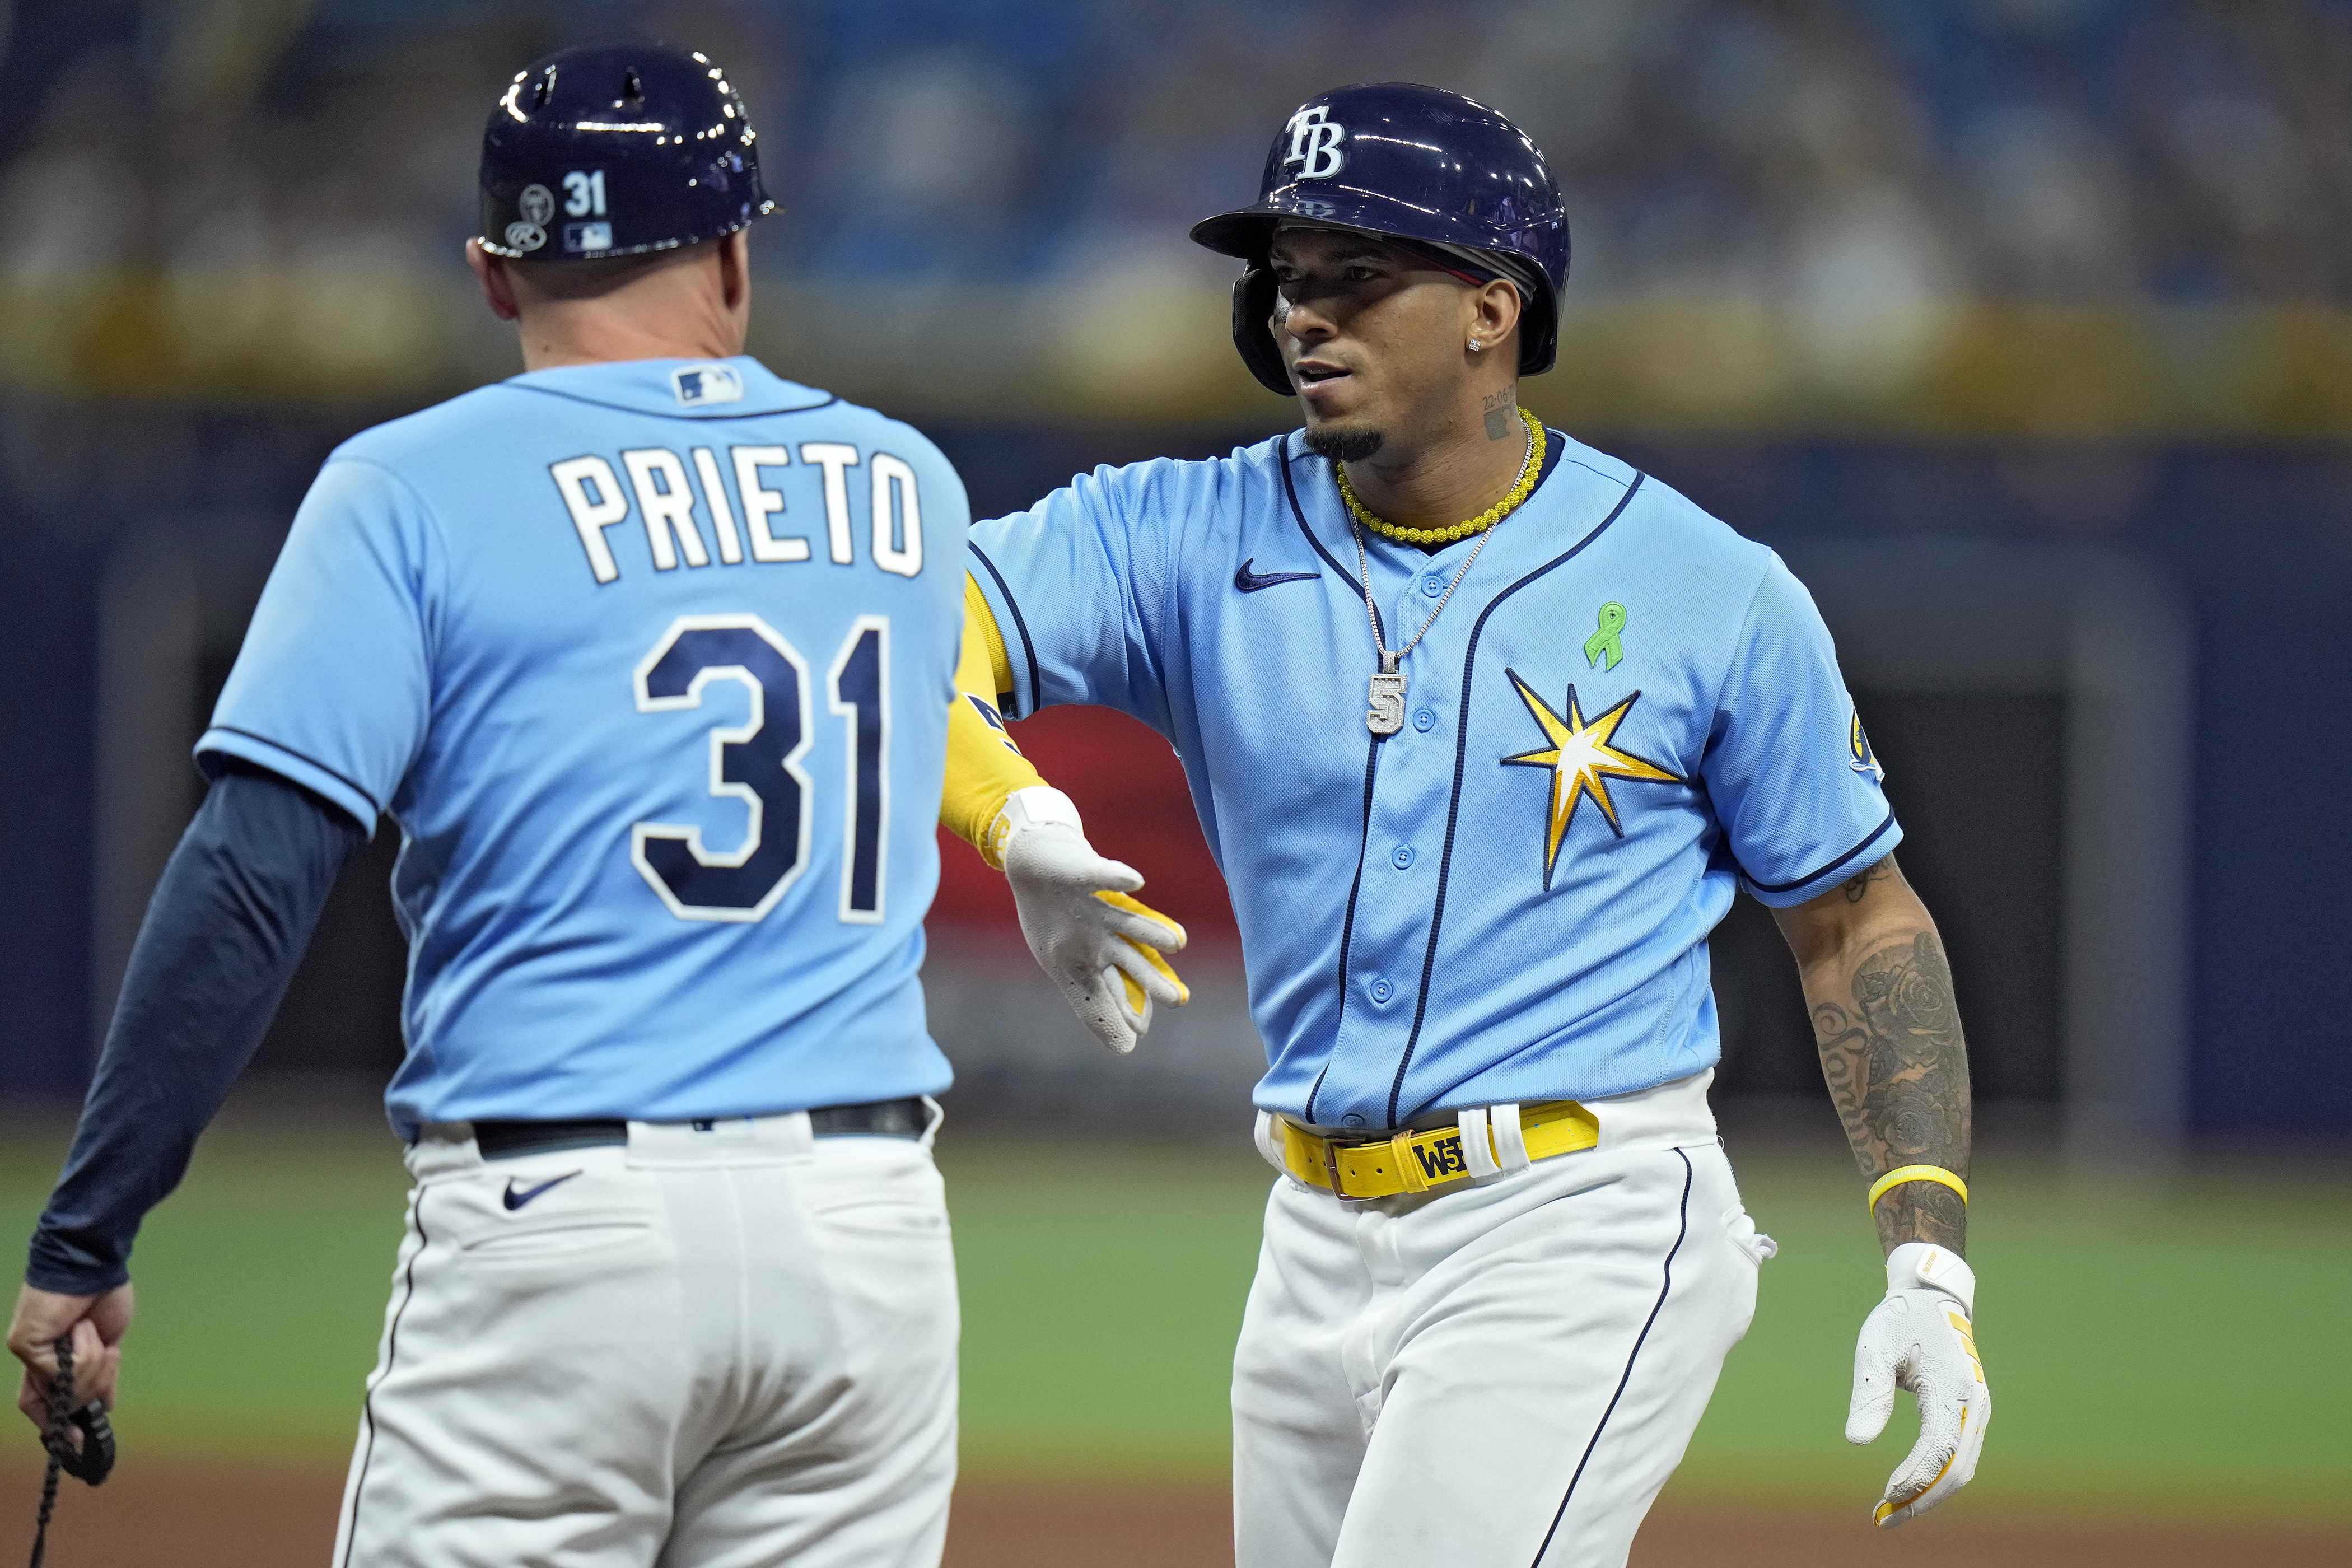 Jhony Brito struggles in Yankees' loss to Tamp Bay Rays